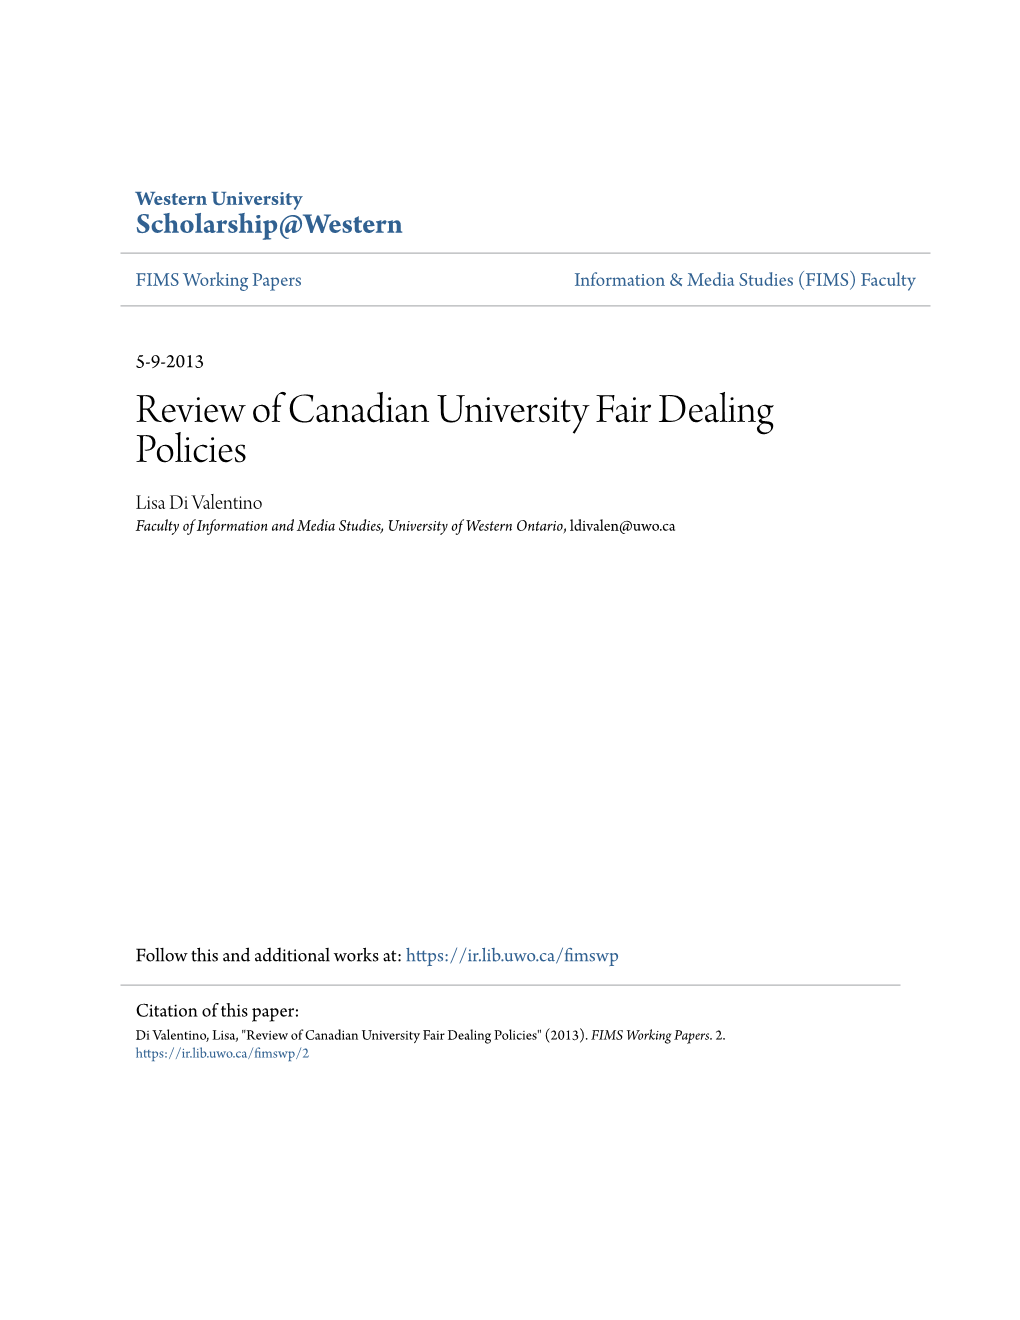 Review of Canadian University Fair Dealing Policies Lisa Di Valentino Faculty of Information and Media Studies, University of Western Ontario, Ldivalen@Uwo.Ca